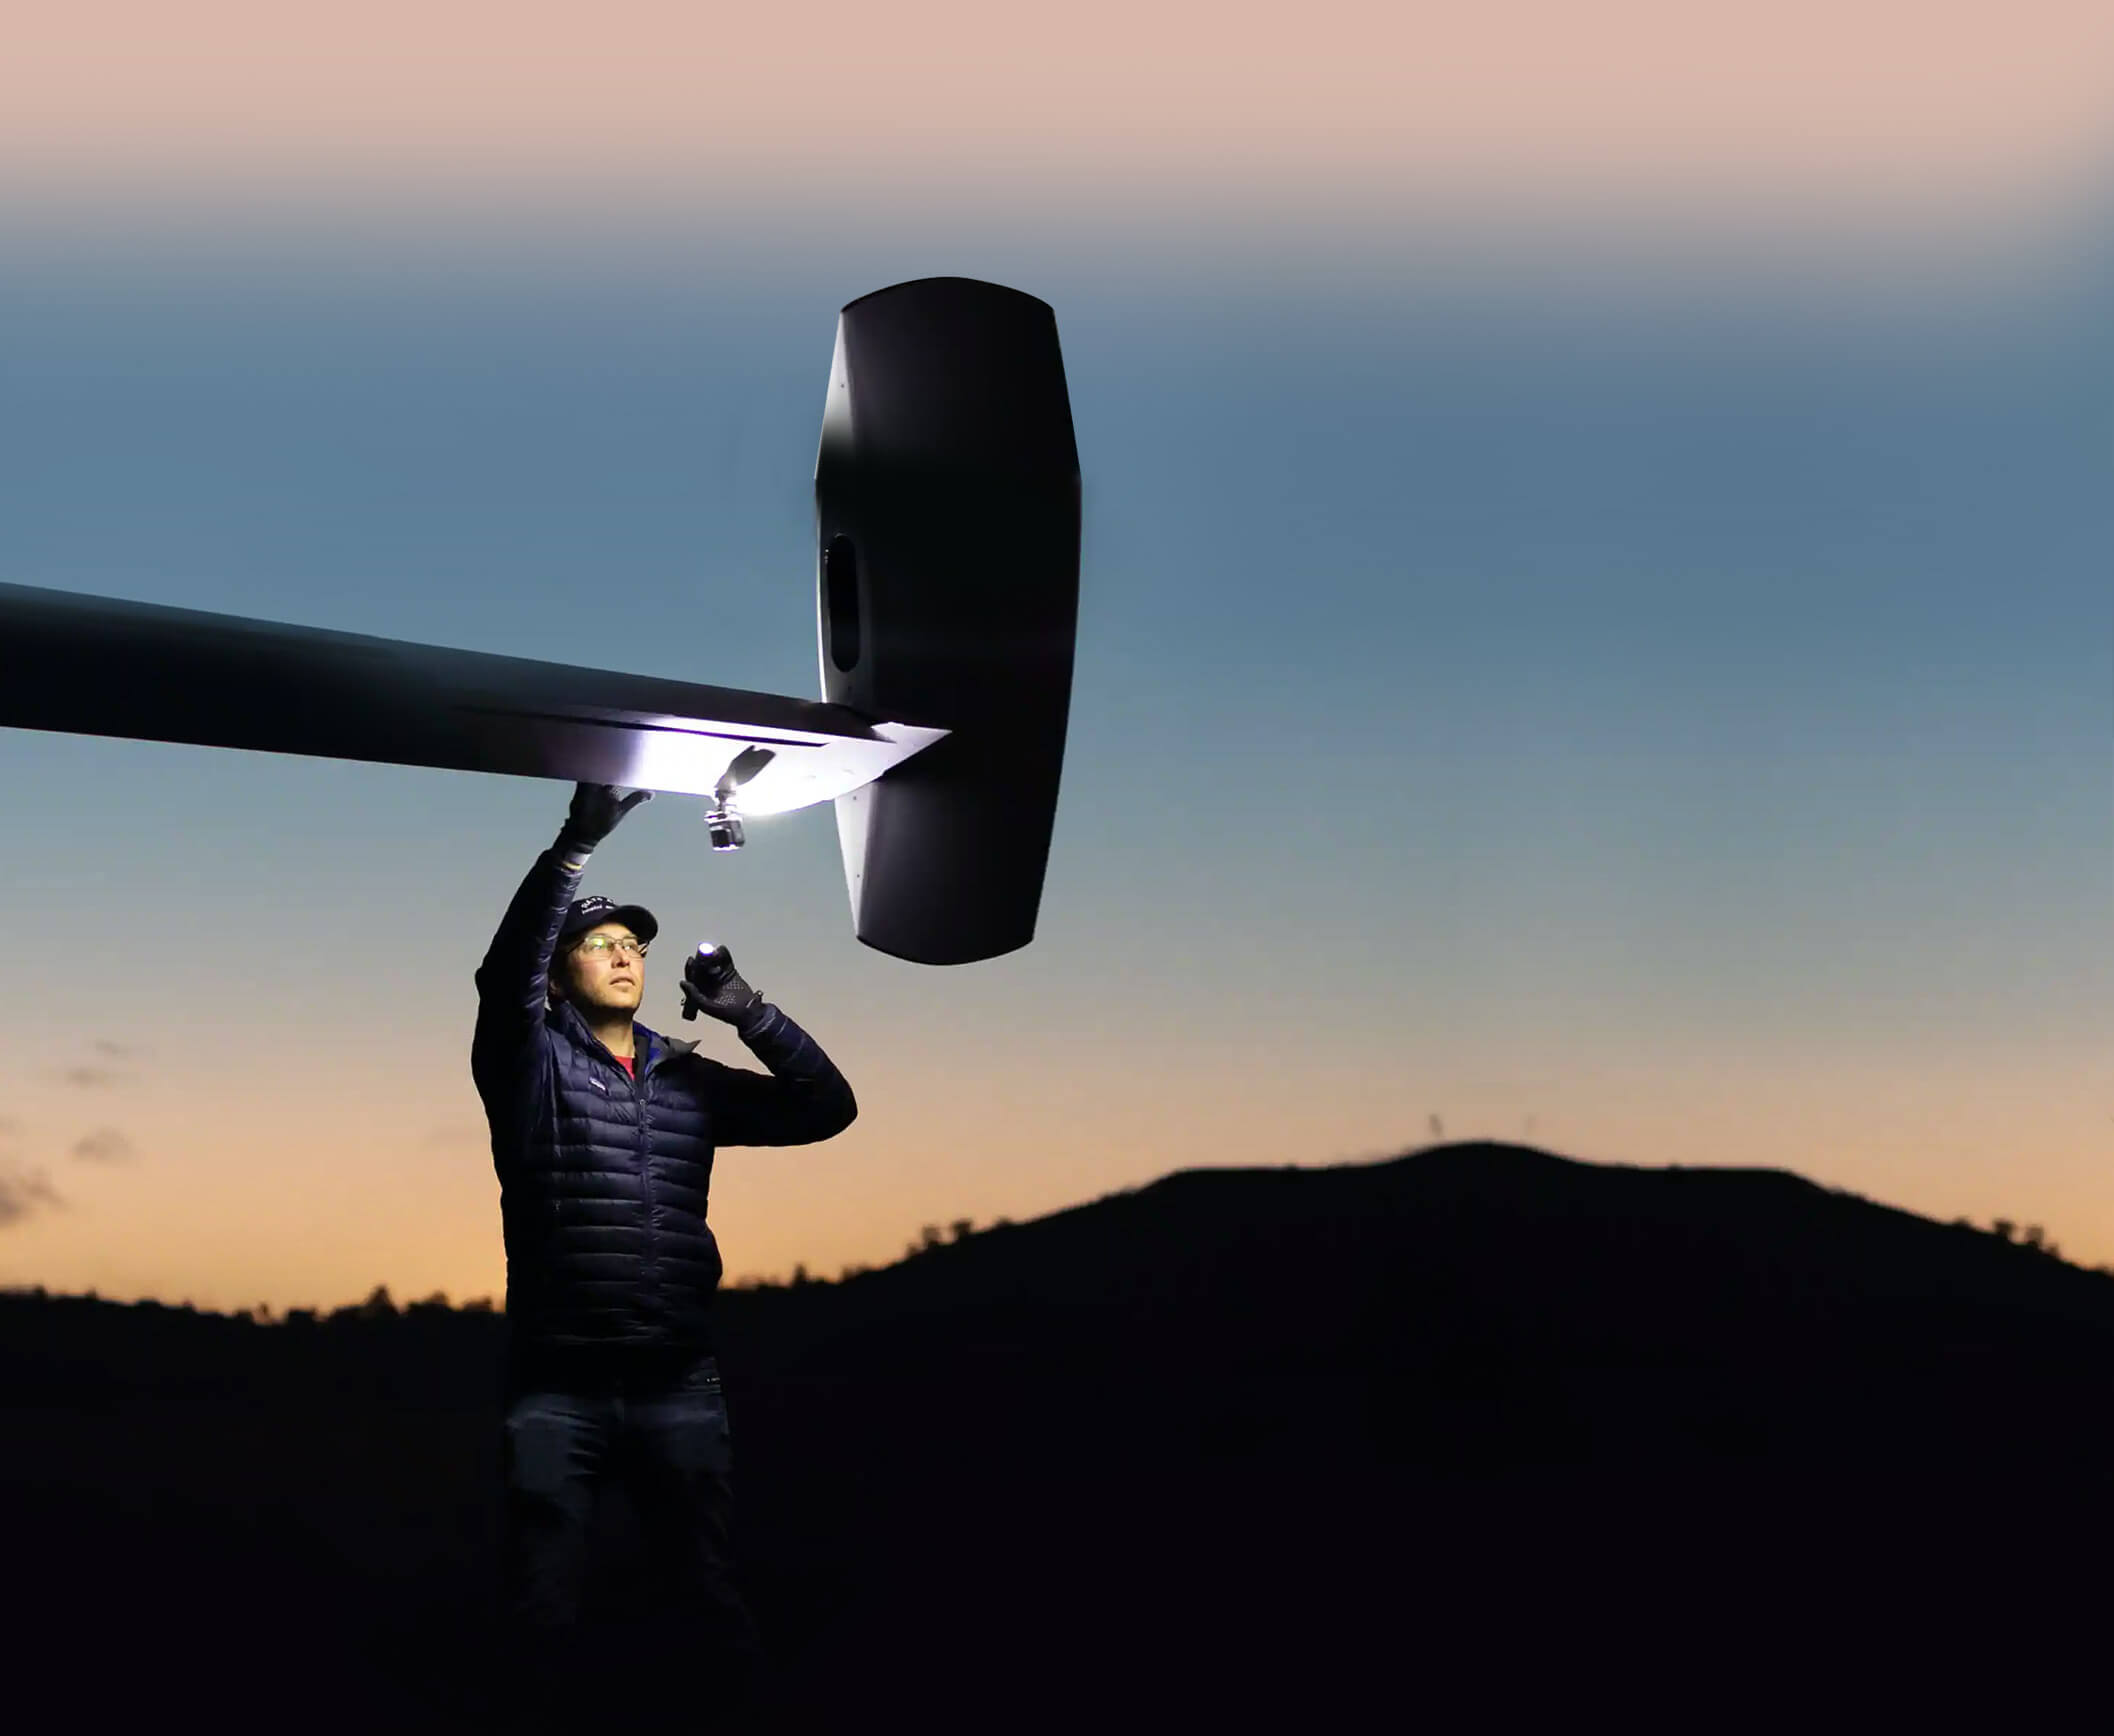 A Man with a Torchlight Checking the Wing of an Airplane